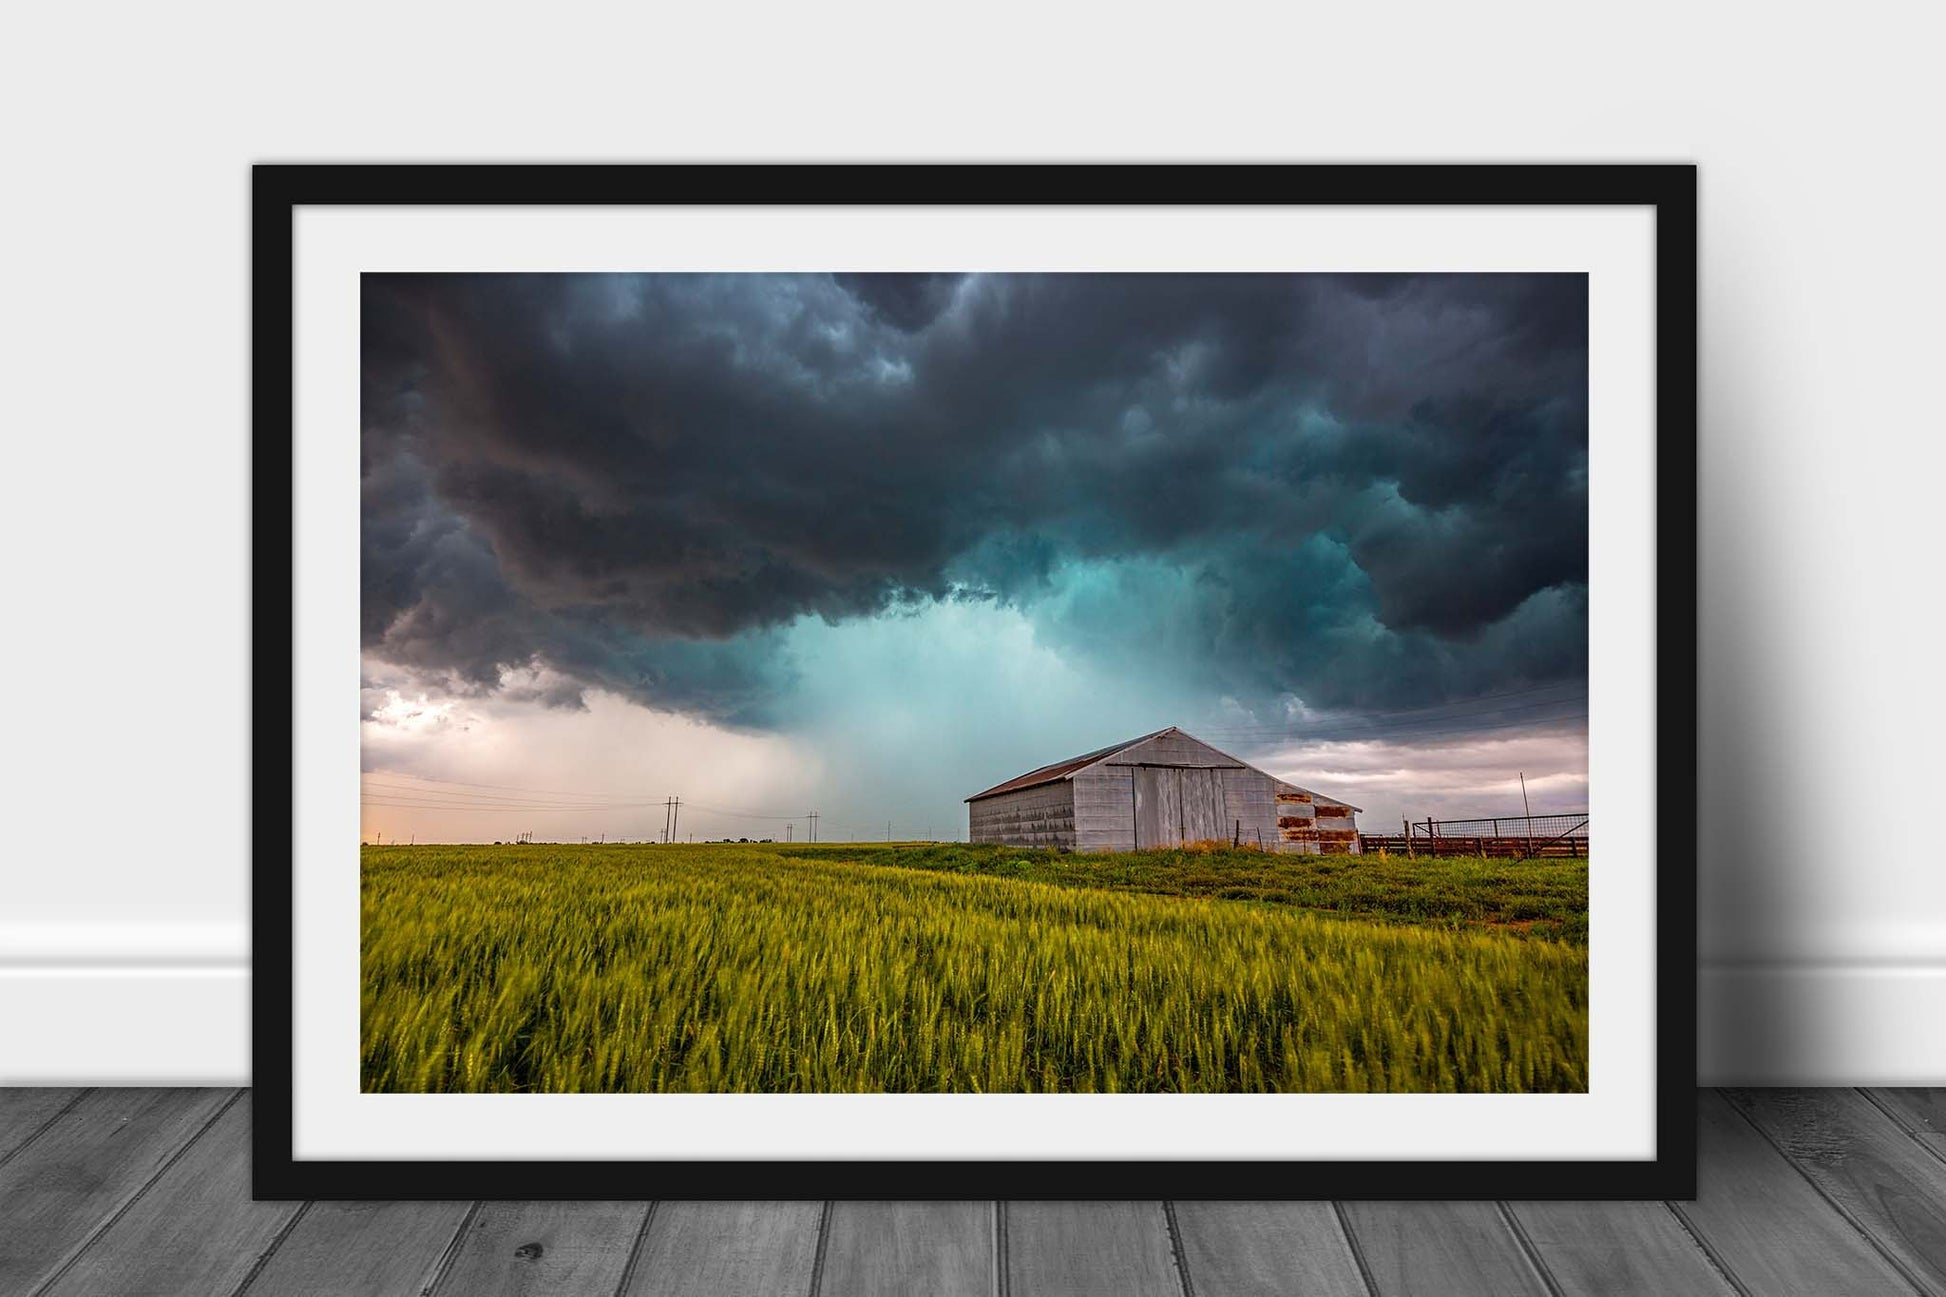 Framed country print of a storm passing behind an old tin covered barn in a wheat field on a stormy spring day in Oklahoma by Sean Ramsey of Southern Plains Photography.